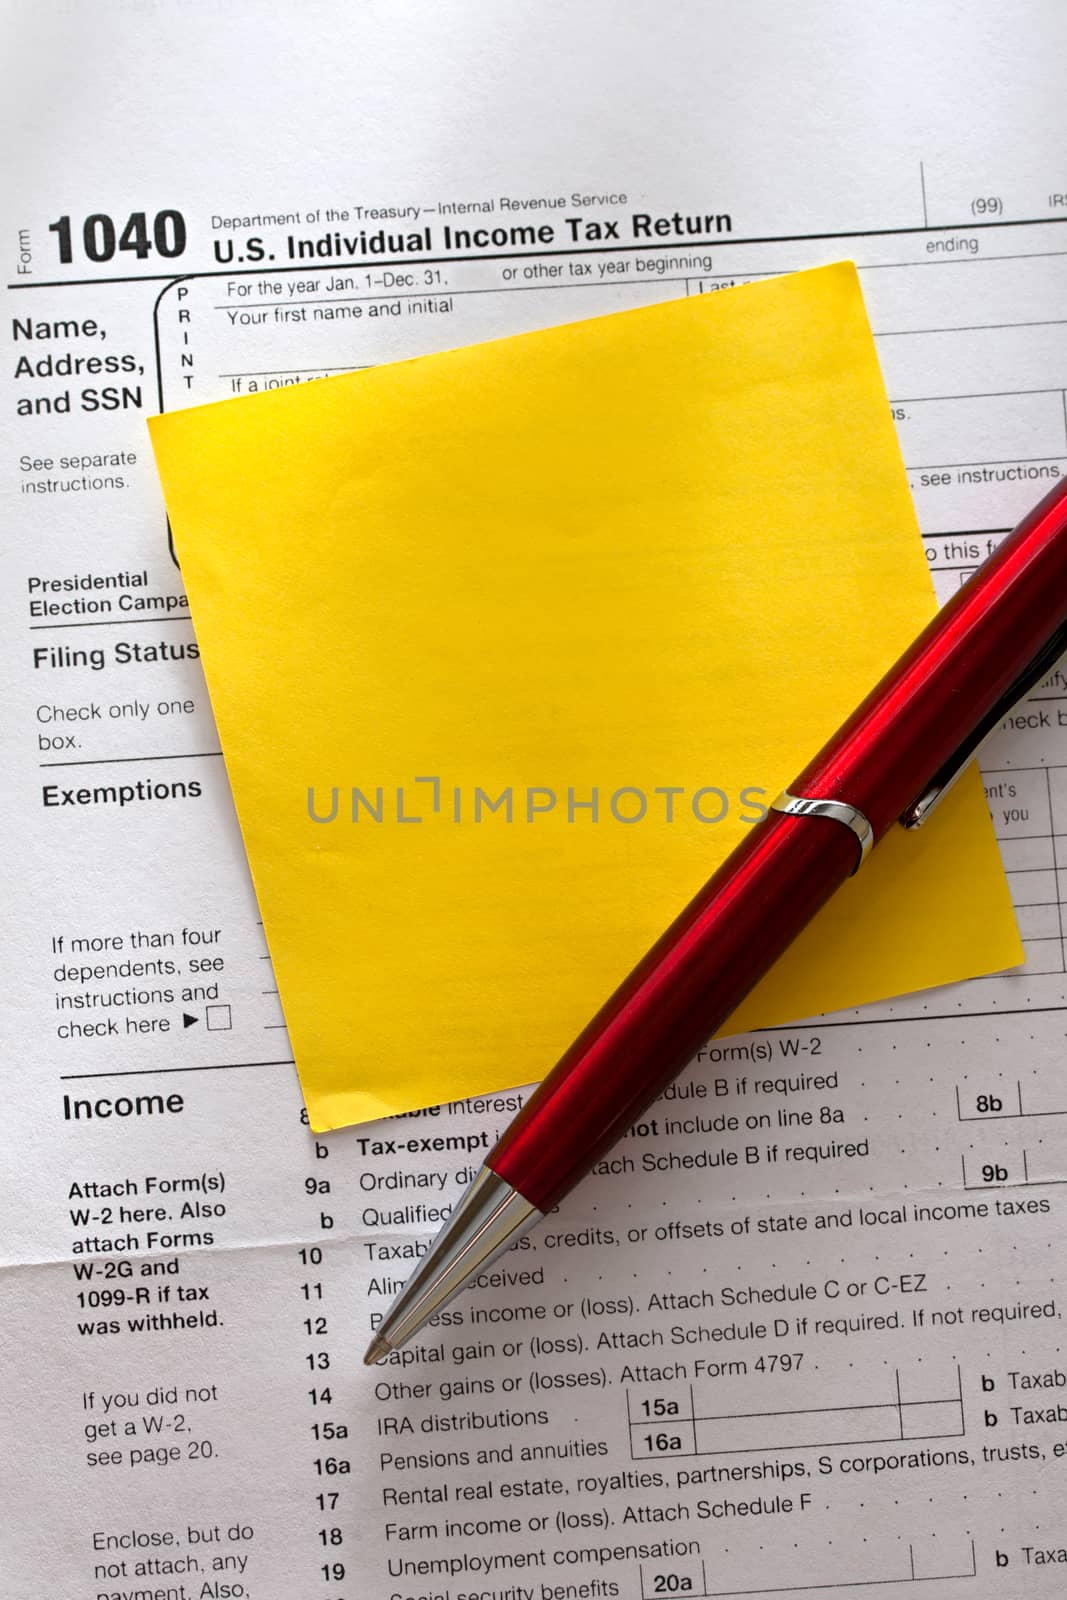 Tax form, red pen and sticker